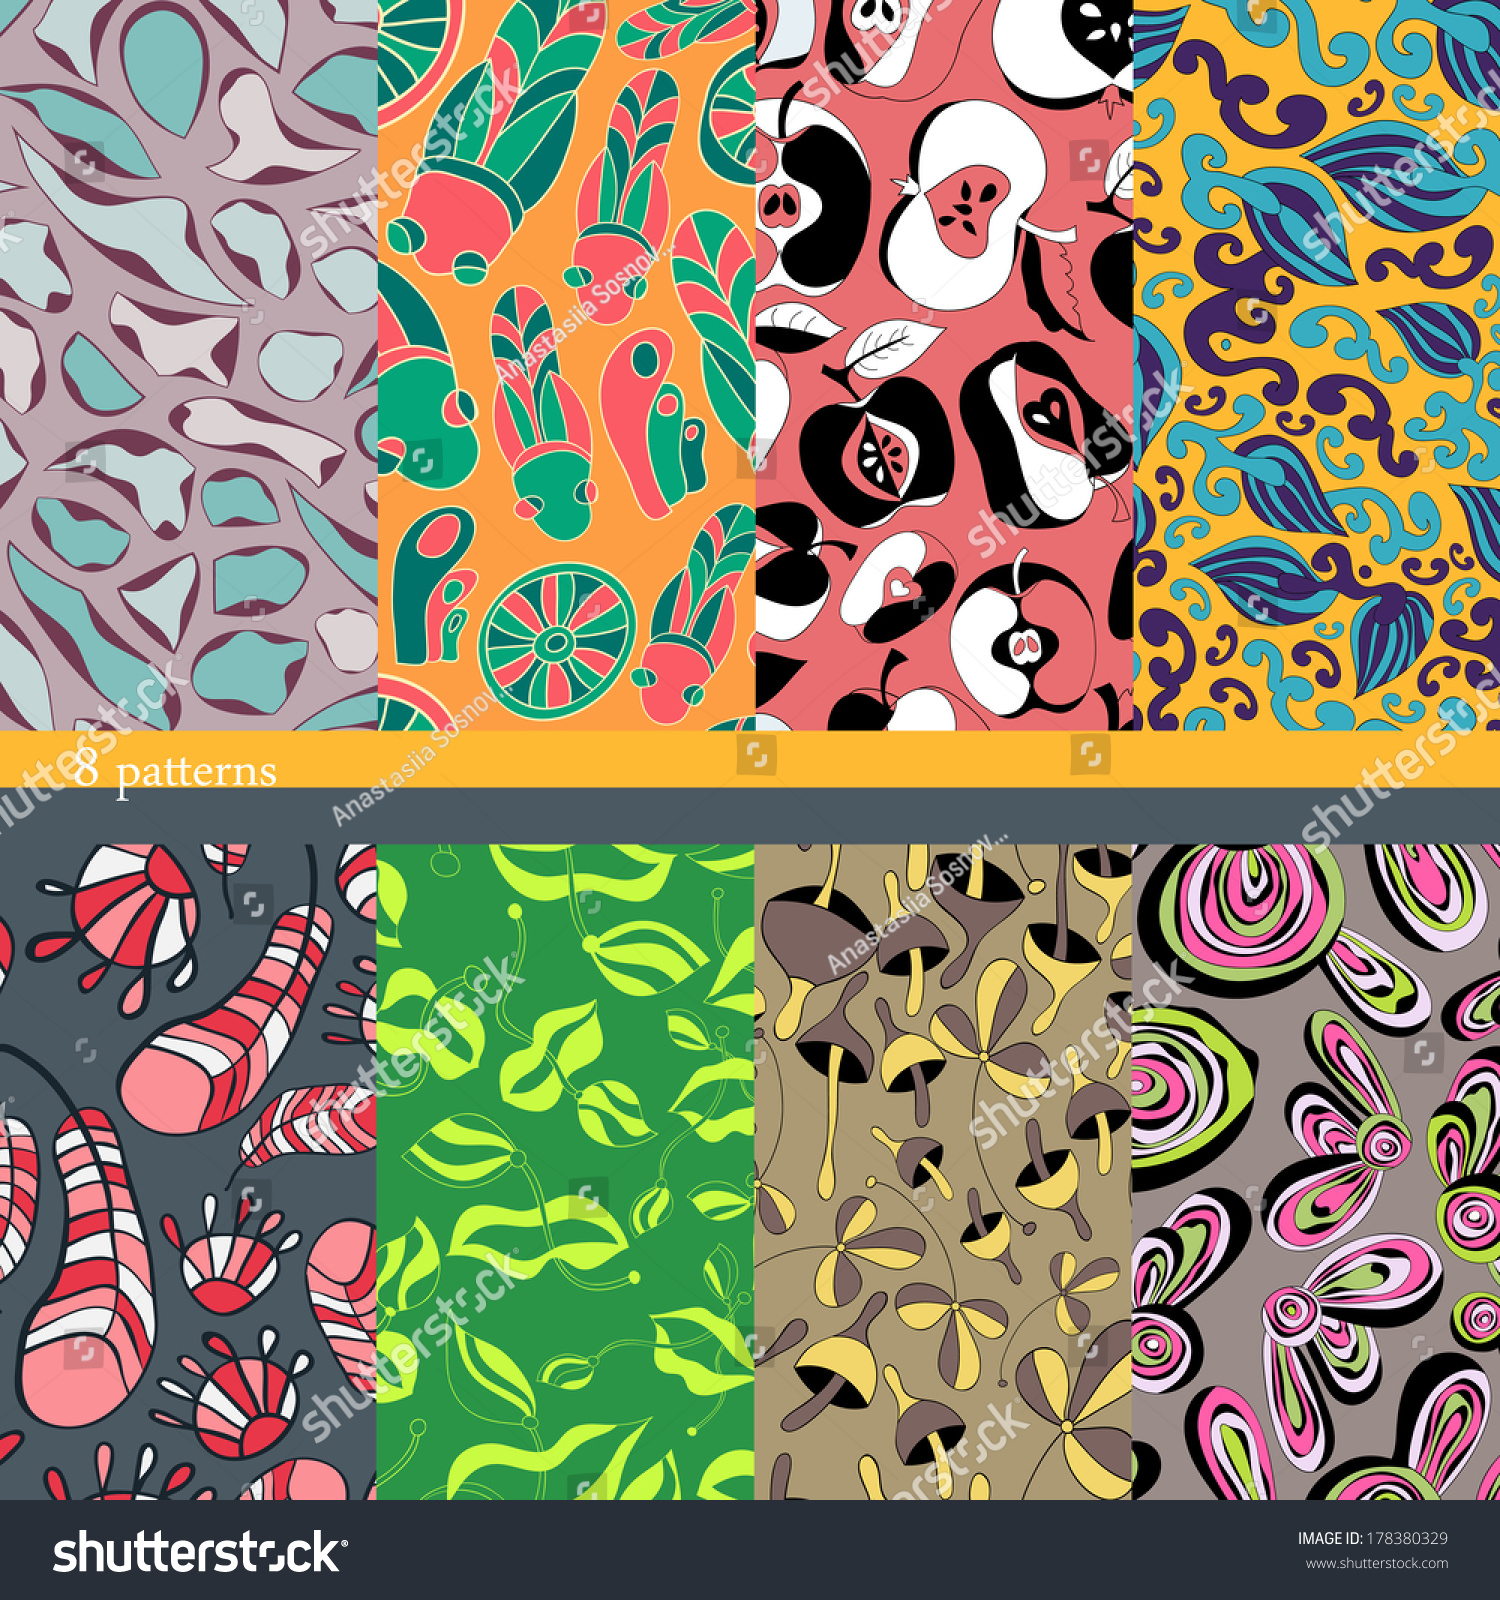 Seamless patterns nice summer backgrounds cartoon stock vector royalty free